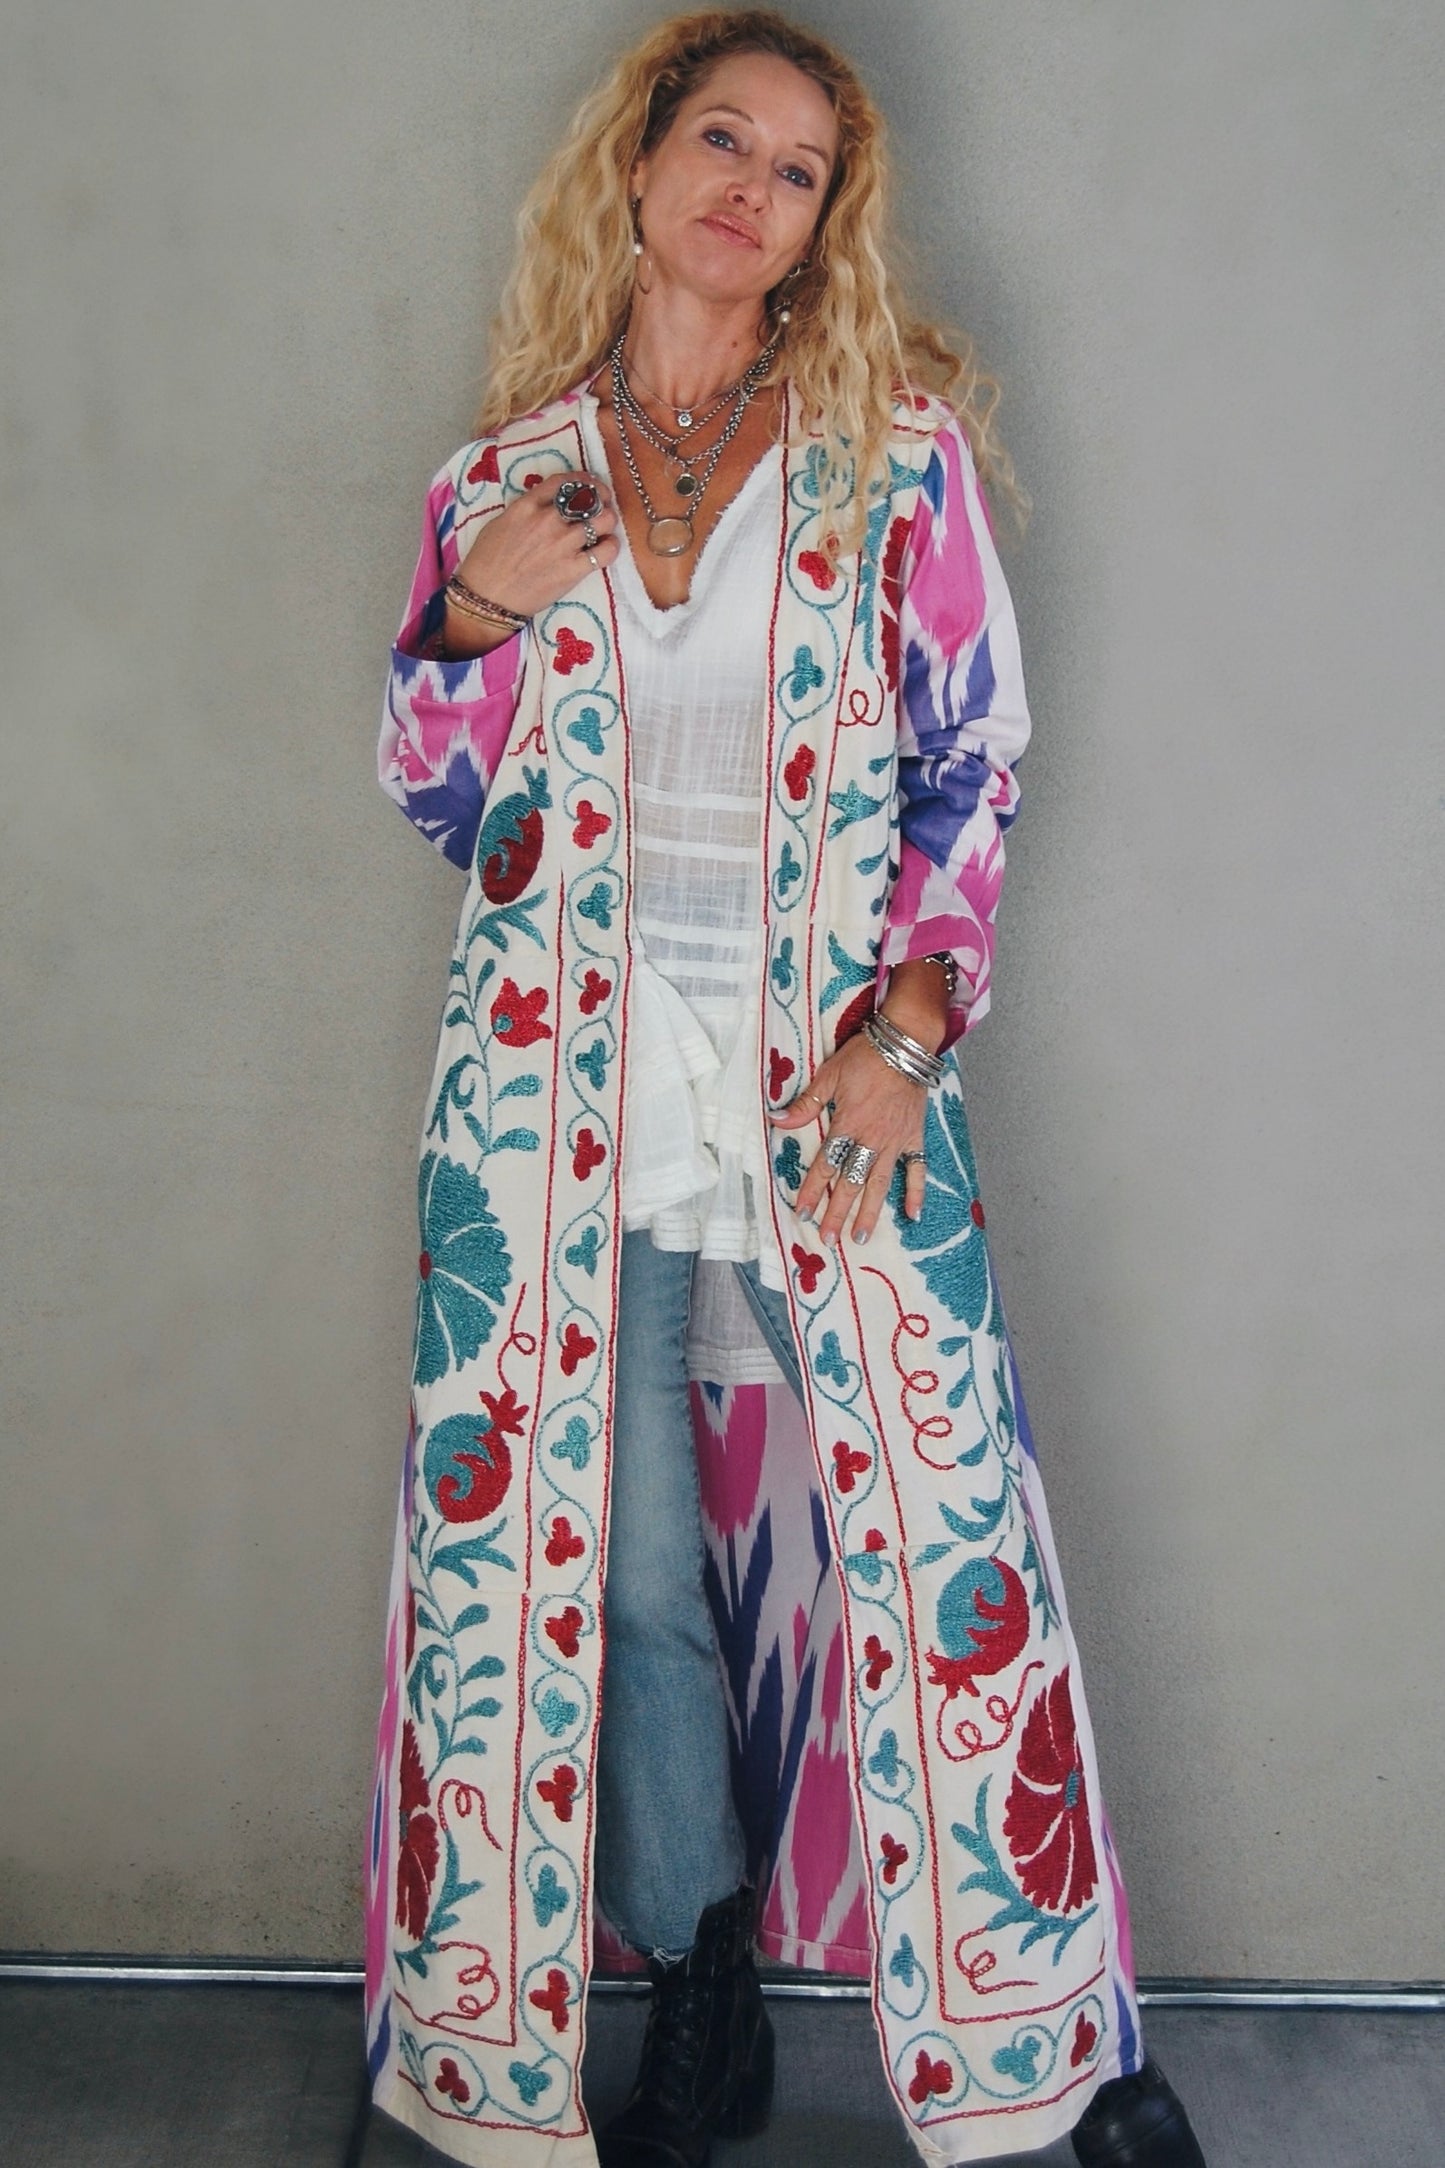 Load image into Gallery viewer, The Hadley Jacket in Daisy - SpiritedBoutiques Boho Hippie Boutique Style Jacket, Spirited
